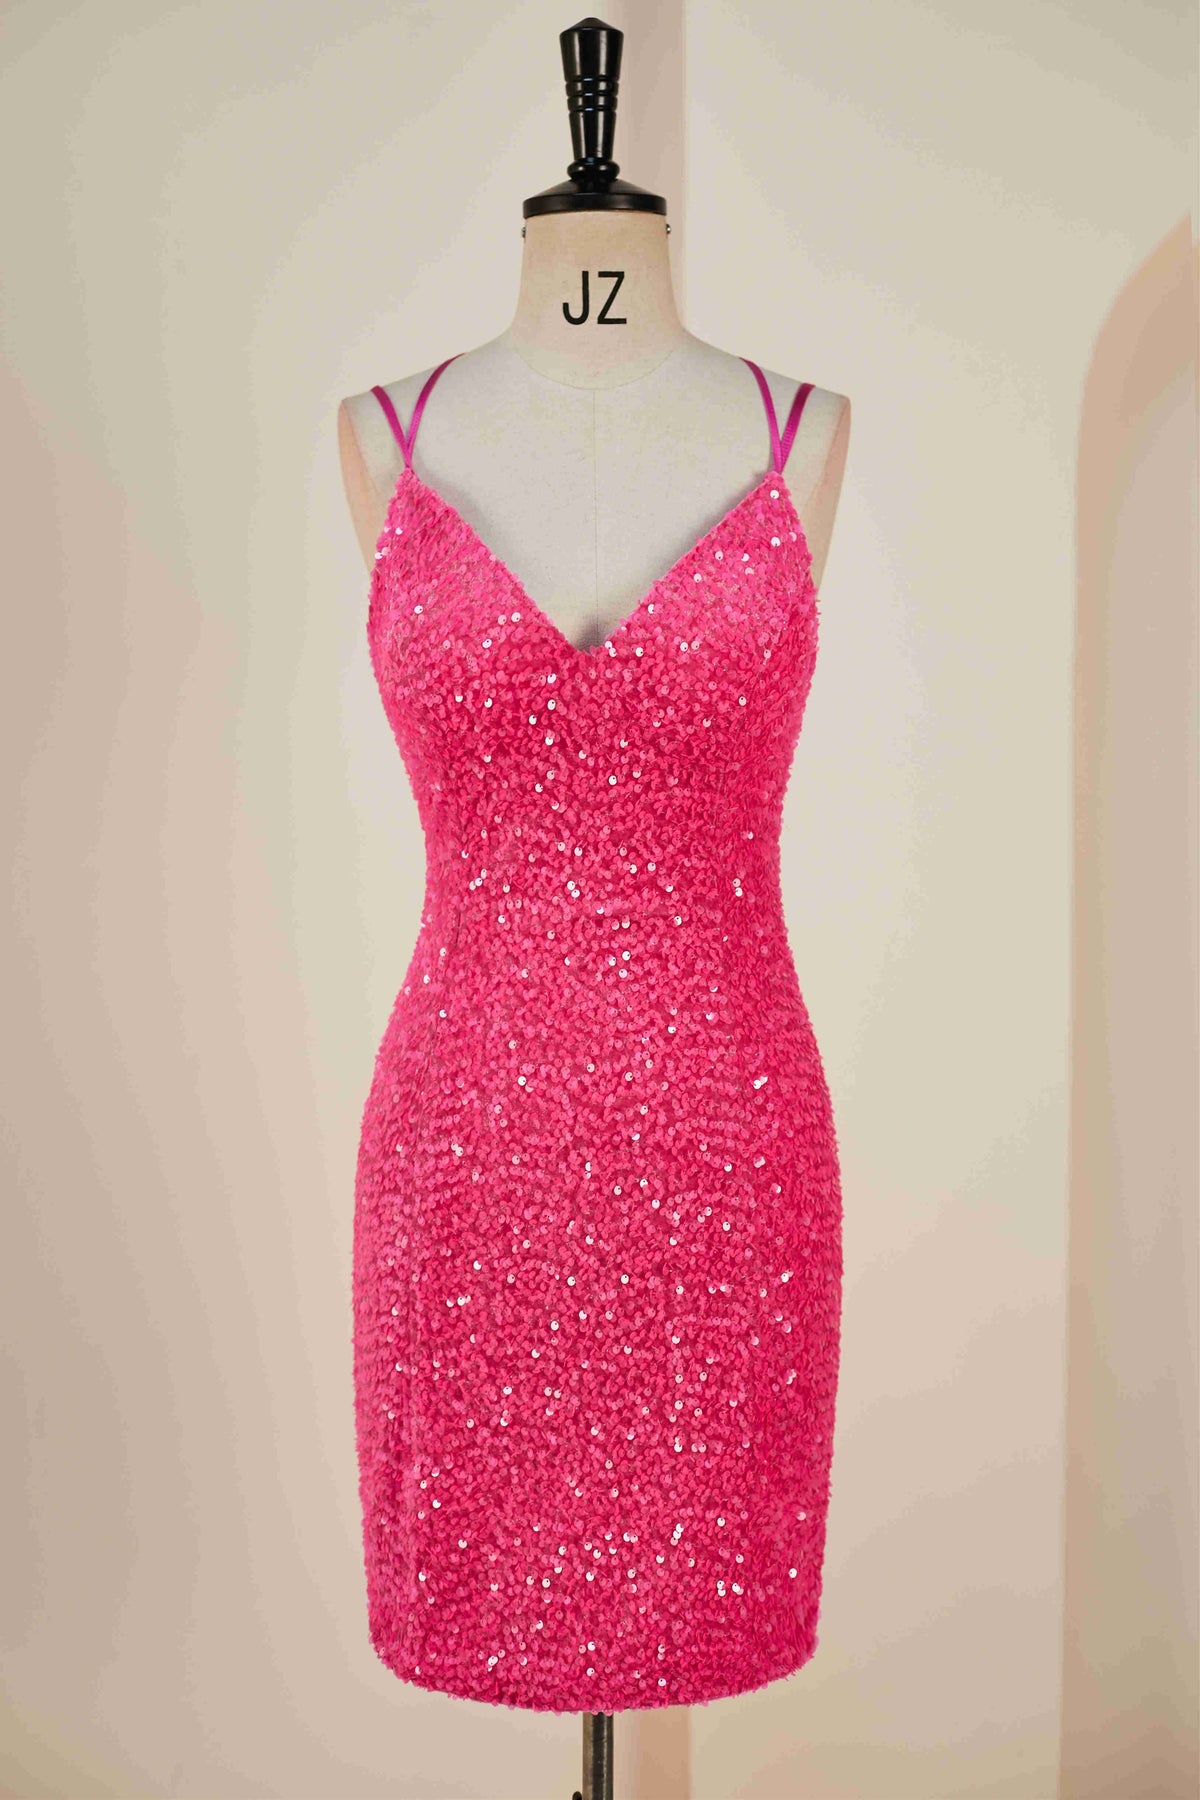 Double Straps Hot Pink Sequin Bodycon Homecoming Dress